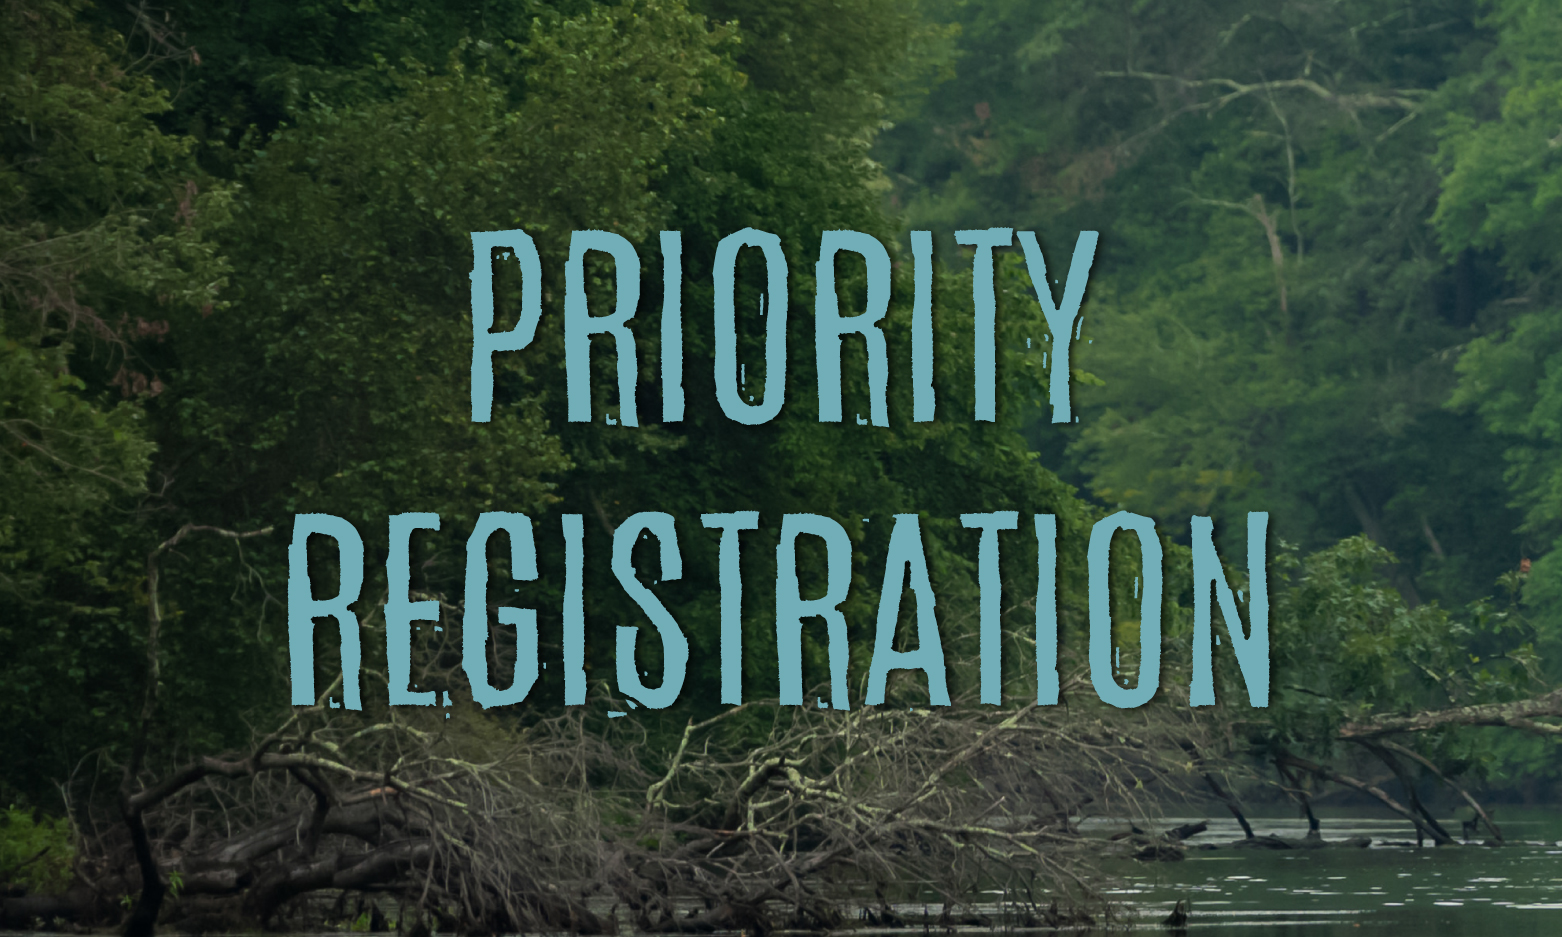 Image with trees in background and priority registration written